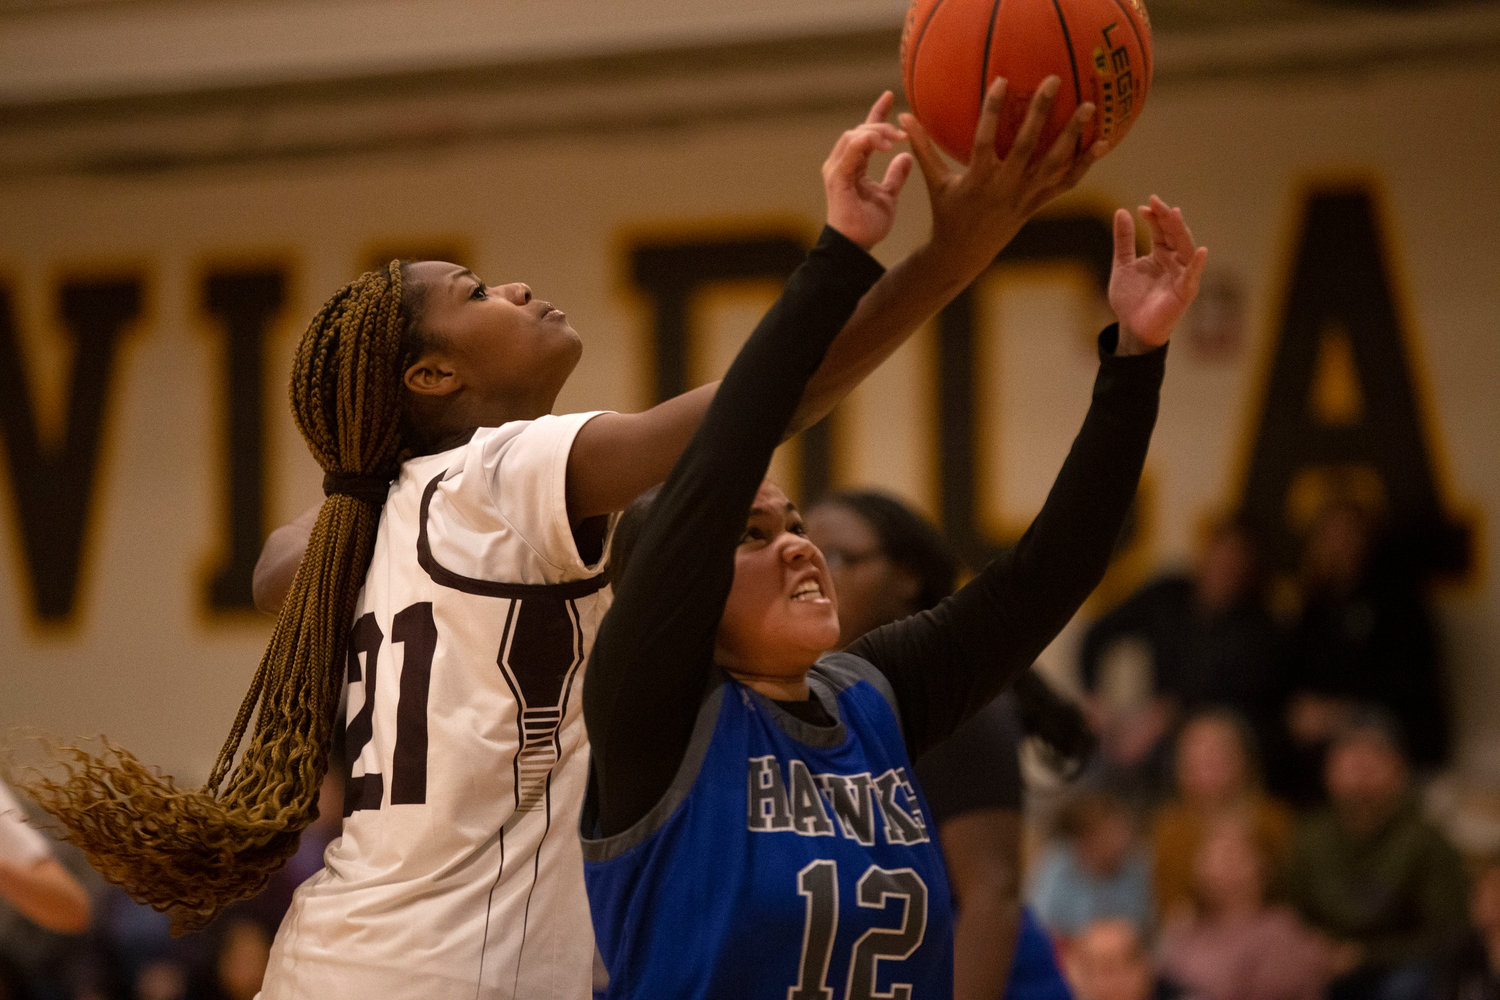 Jenna Egbe grabs a rebound away from a Southeastern player with one hand.